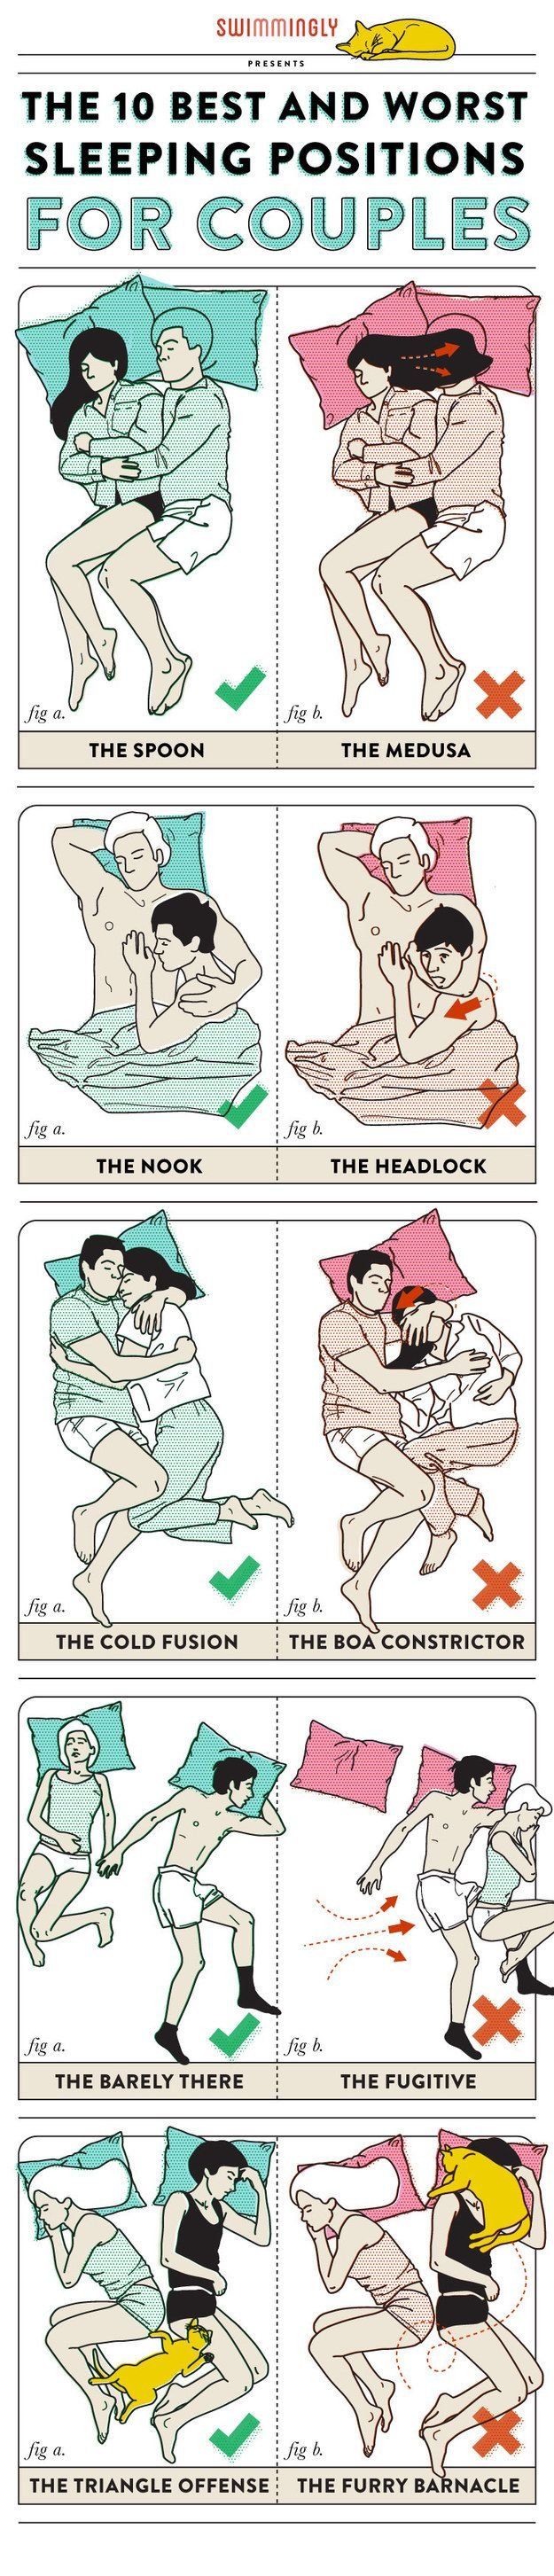 Best Positions for Couples